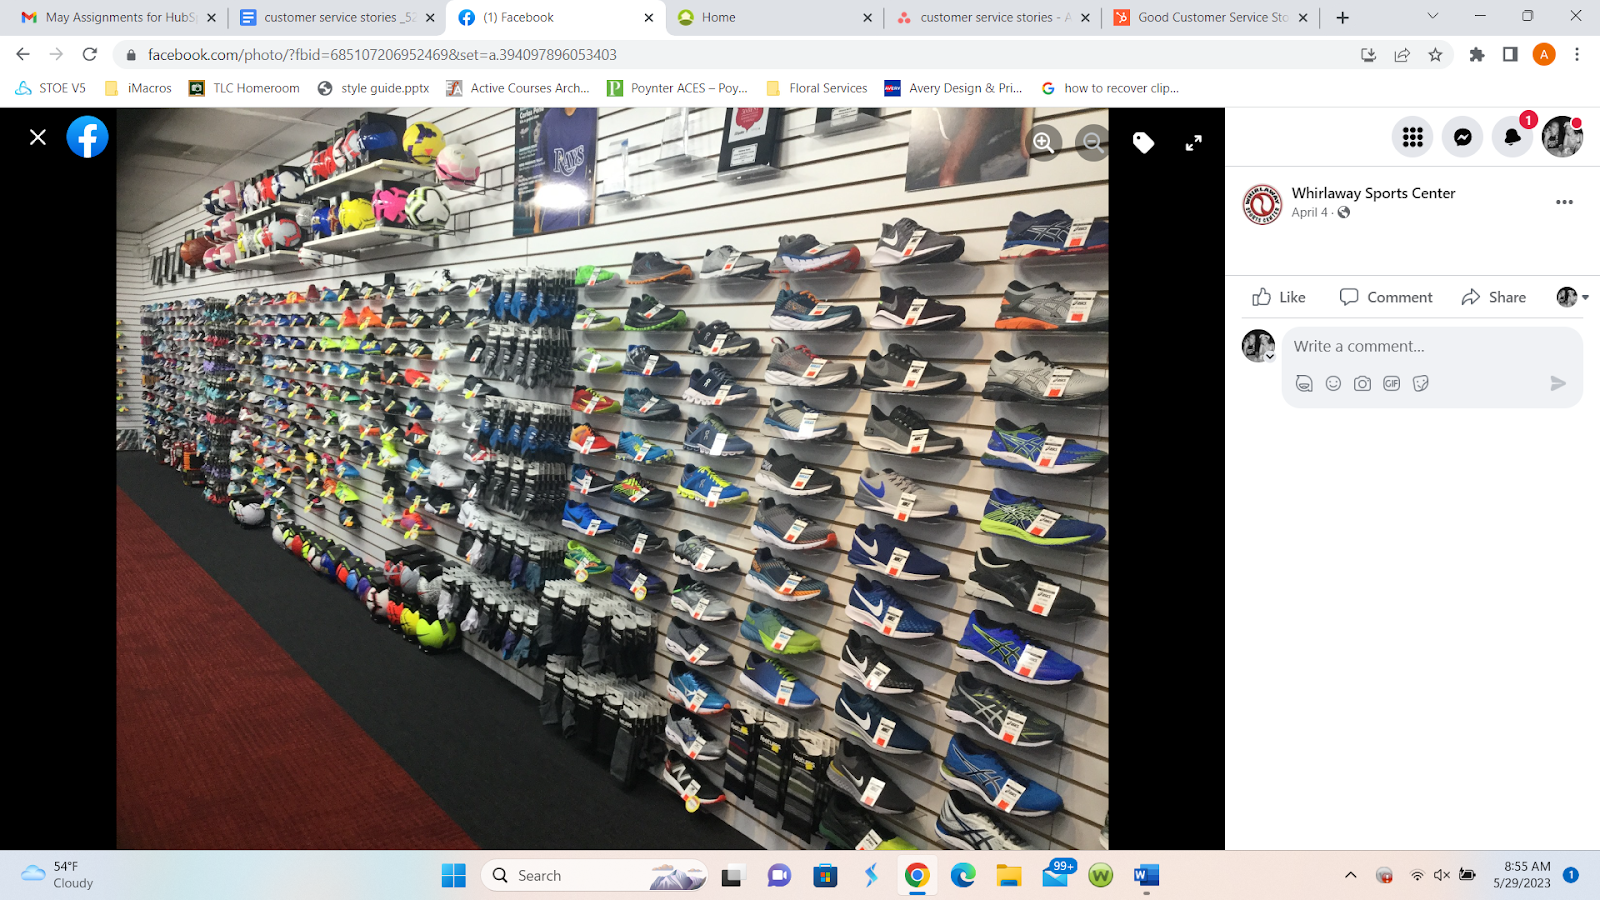 customer service stories, wall of shoes at whirlaway sports